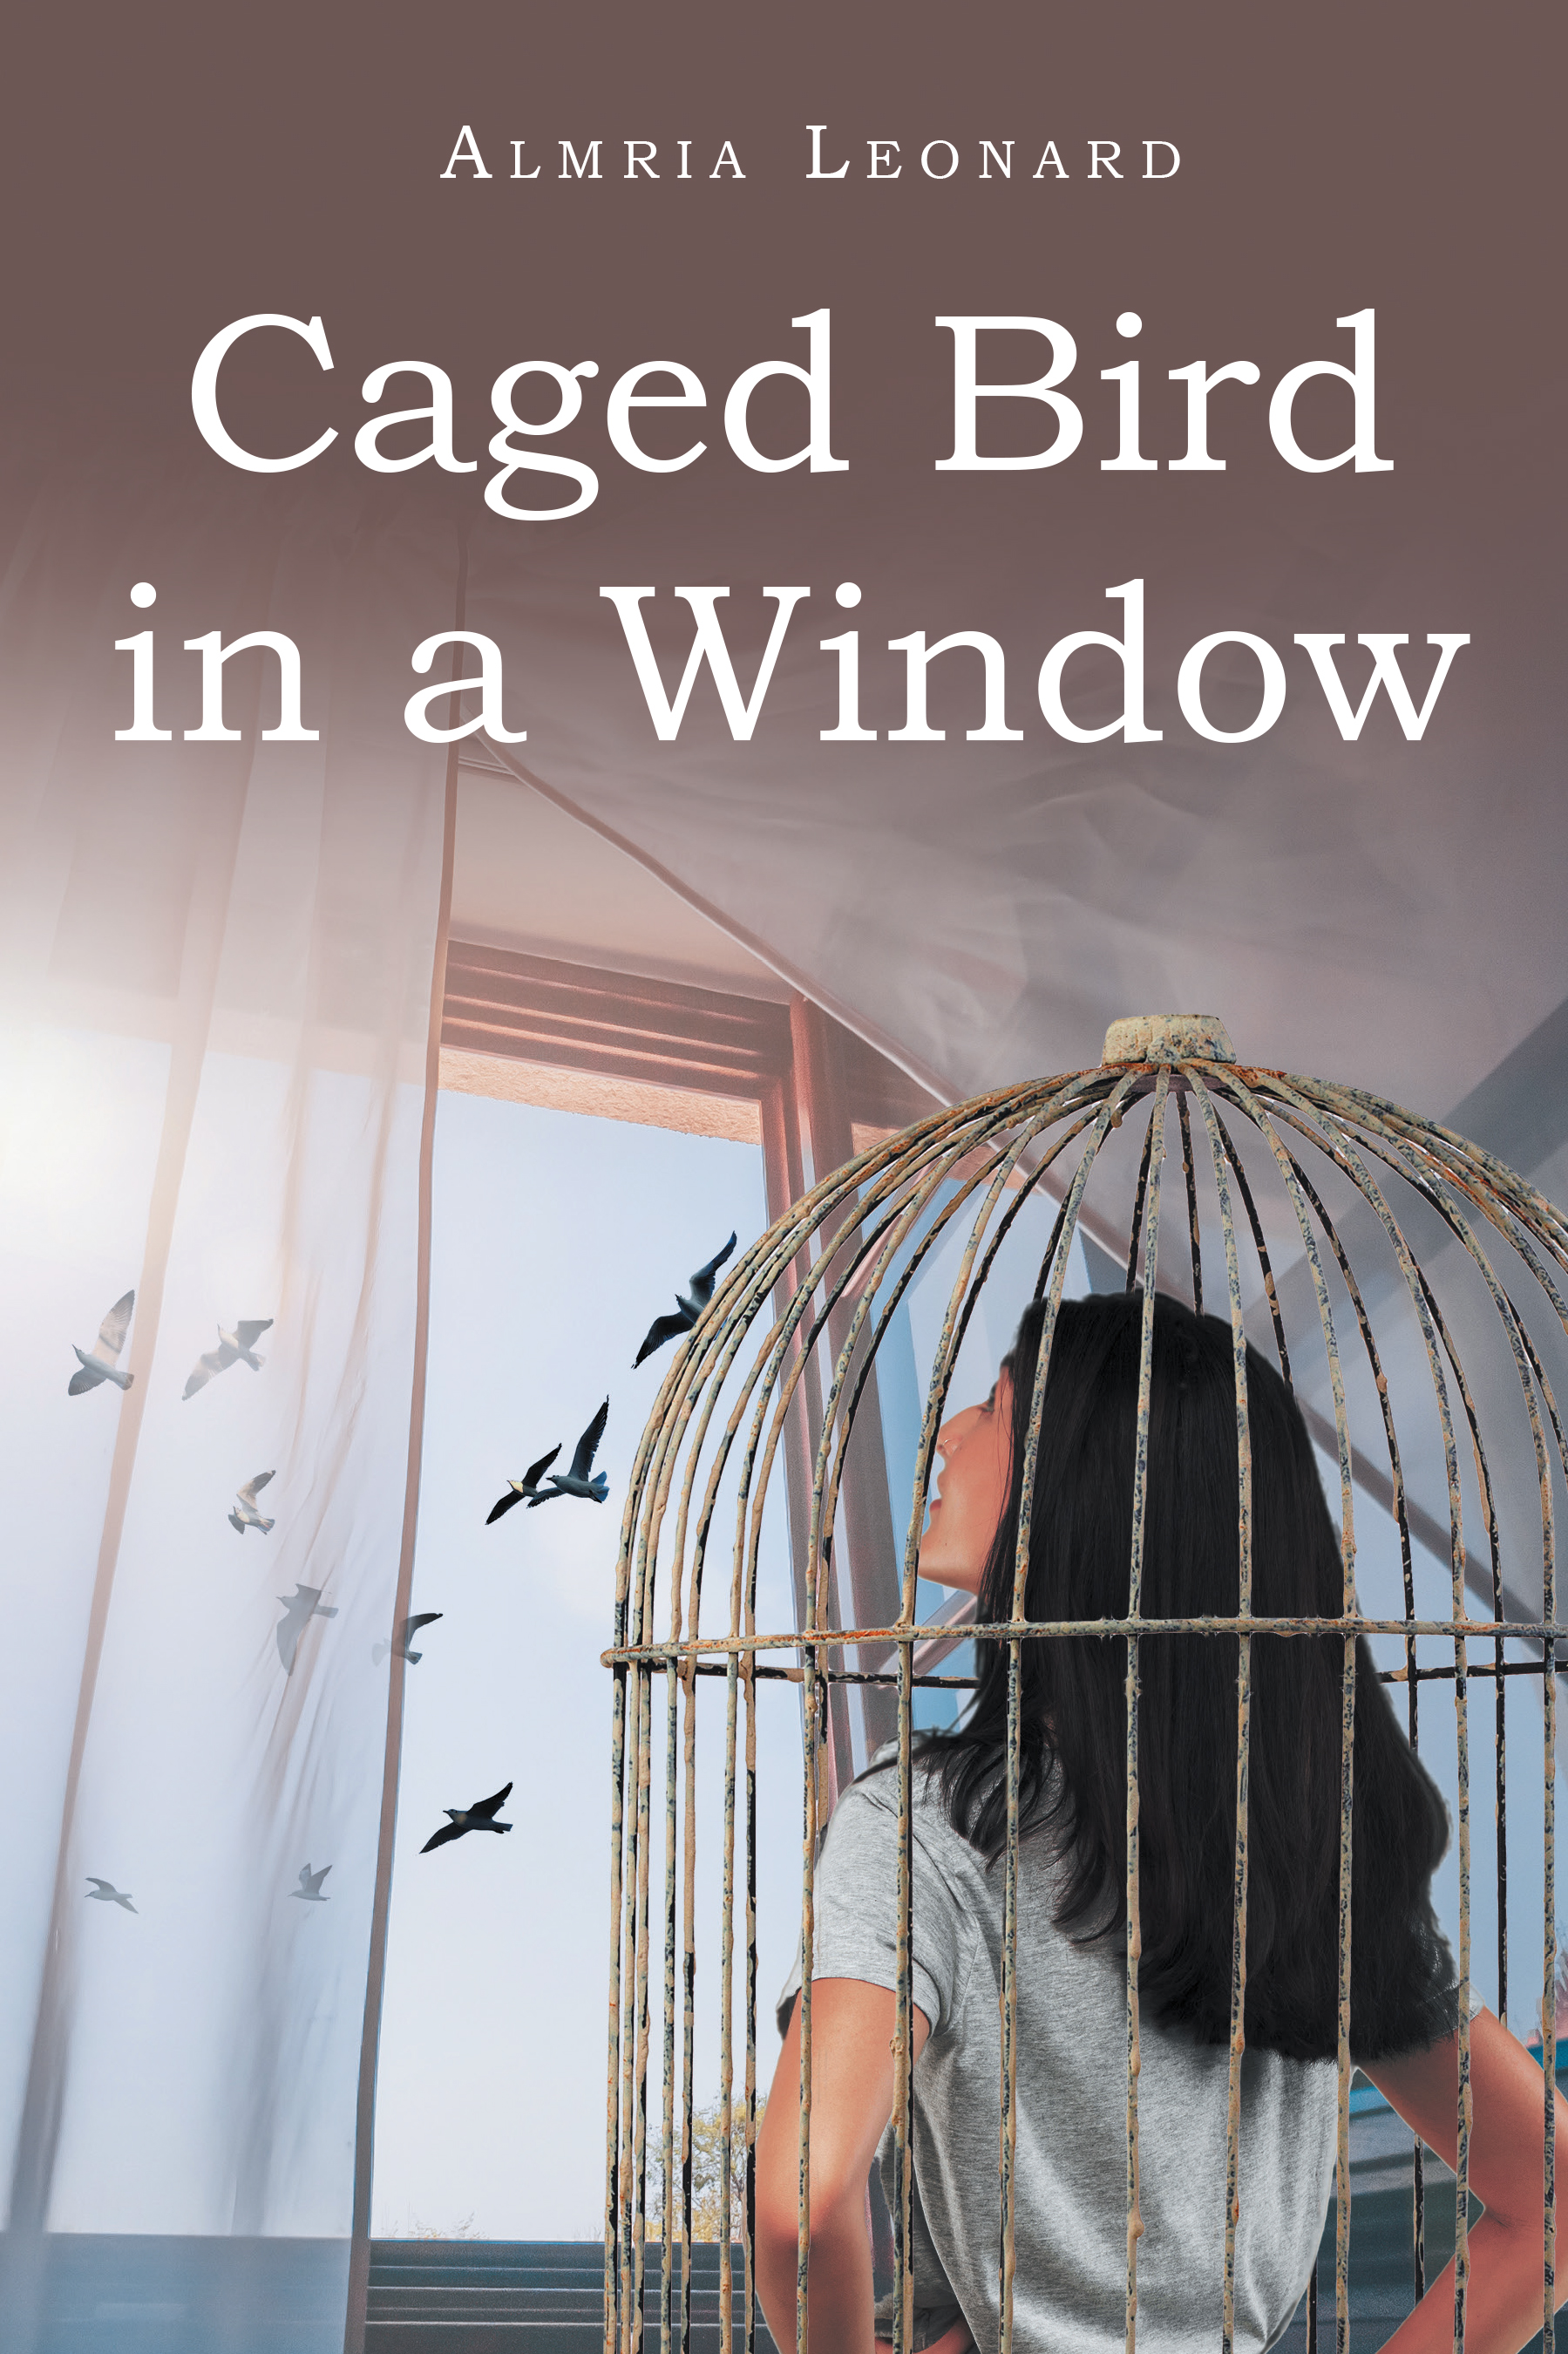 Author Almria Leonard’s New Book, "Caged Bird in a Window," is a Powerful Memoir Detailing the Countless Struggles the Author Has Endured Throughout Her Life